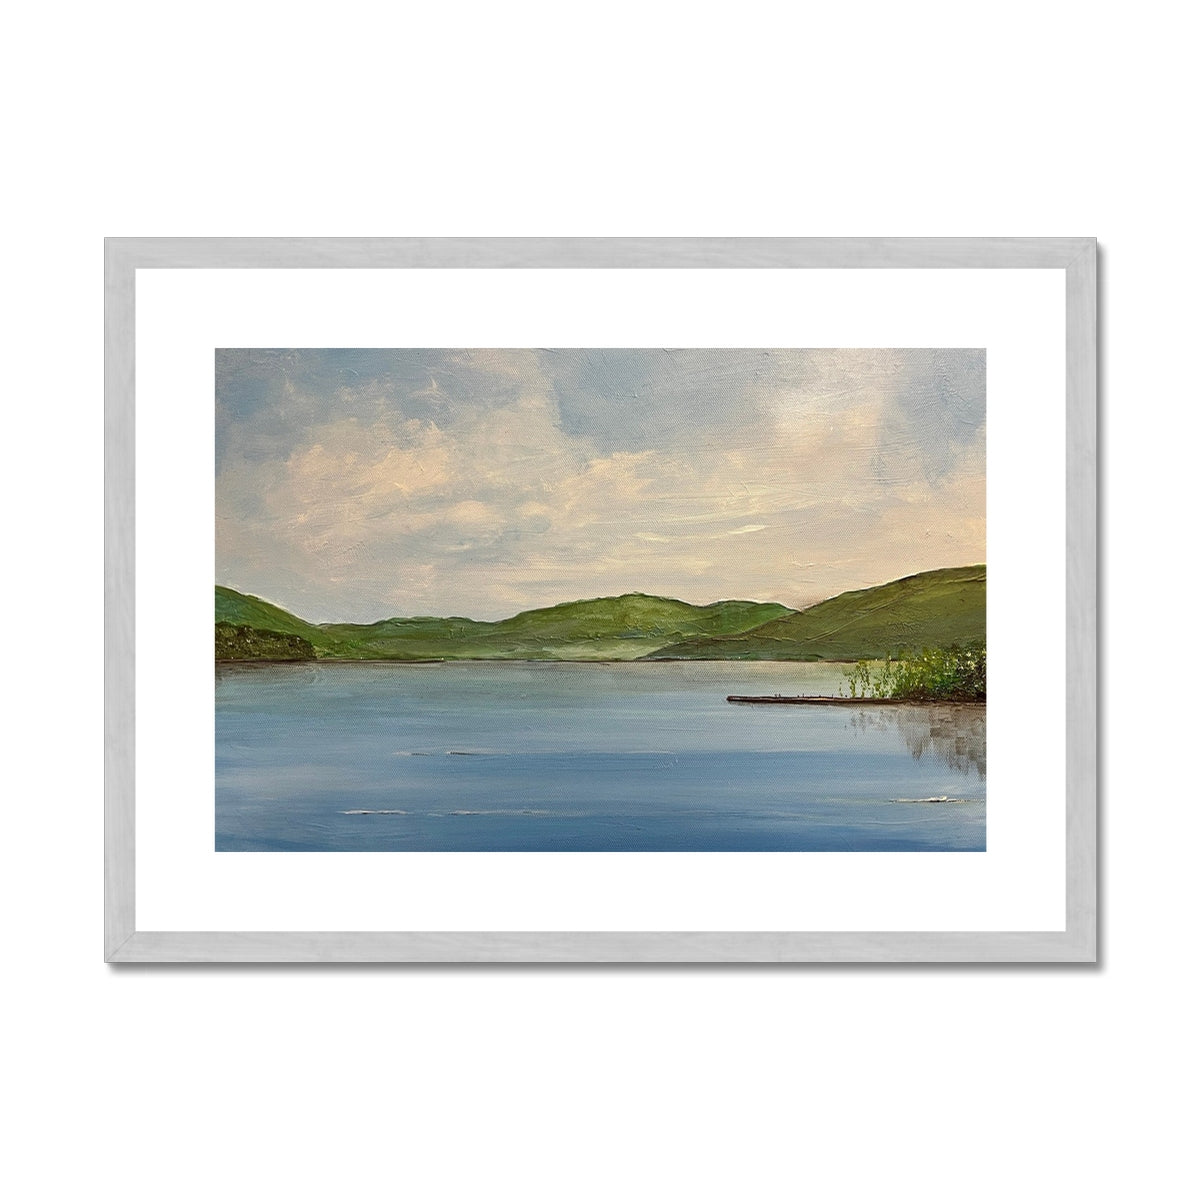 Loch Tay ii Painting | Antique Framed & Mounted Prints From Scotland-Antique Framed & Mounted Prints-Scottish Lochs & Mountains Art Gallery-A2 Landscape-Silver Frame-Paintings, Prints, Homeware, Art Gifts From Scotland By Scottish Artist Kevin Hunter